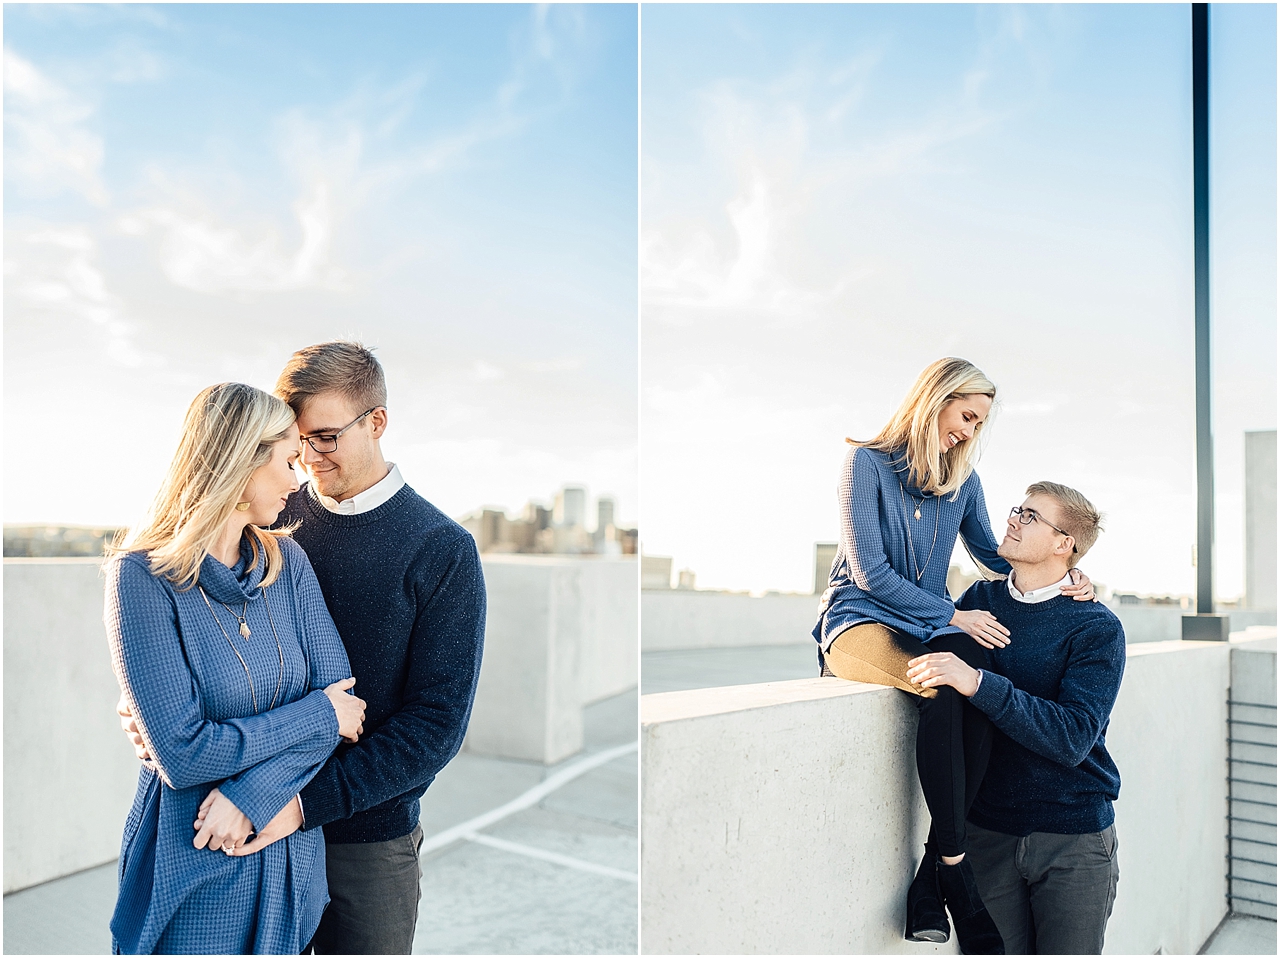  Lindsey Ann Photography -&nbsp;Engagement session at the Botanical Gardens in Downtown Birmingham 